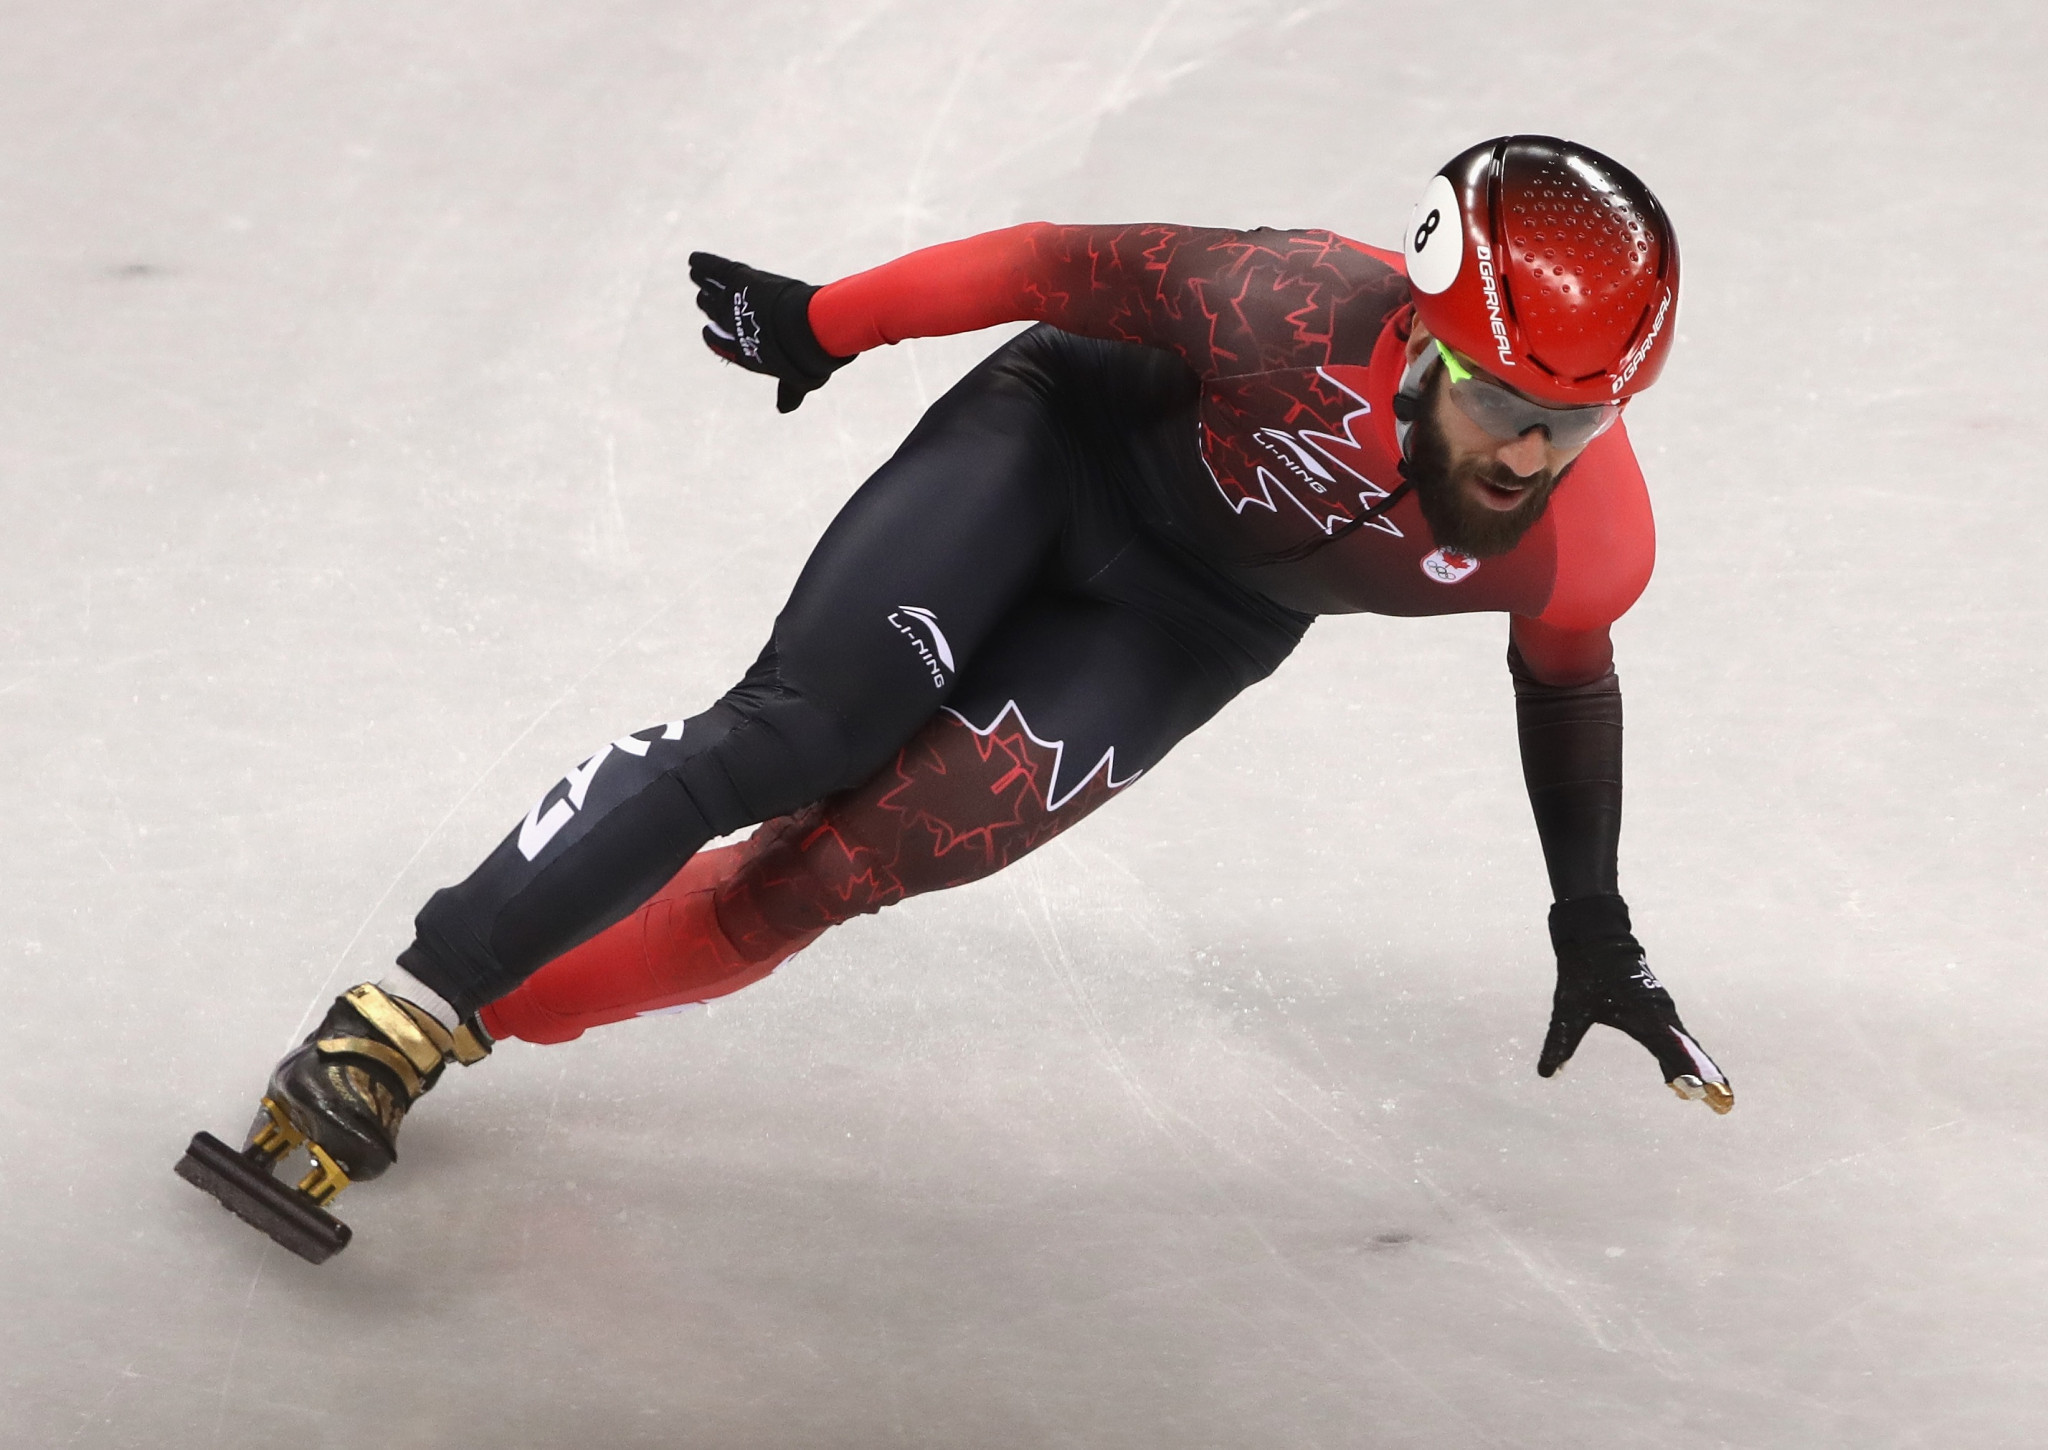 Canada's Charles Hamelin came out on top in the men's 1,500m event ©Getty Images